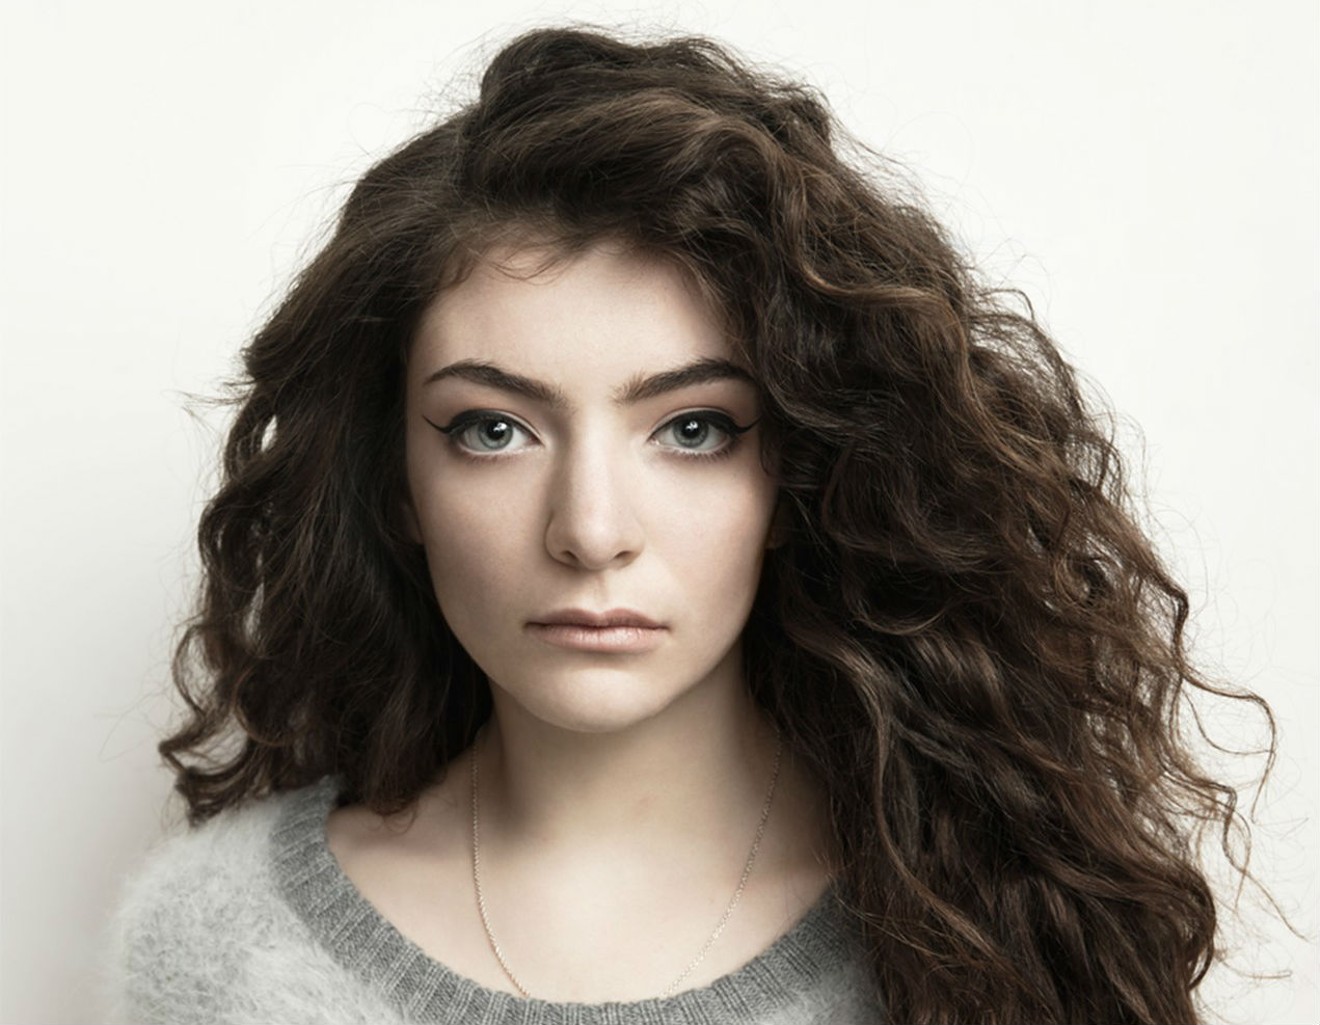 From rockin' with Nirvana to a once-in-a-lifetime Bowie tribute, Lorde is on a roll.